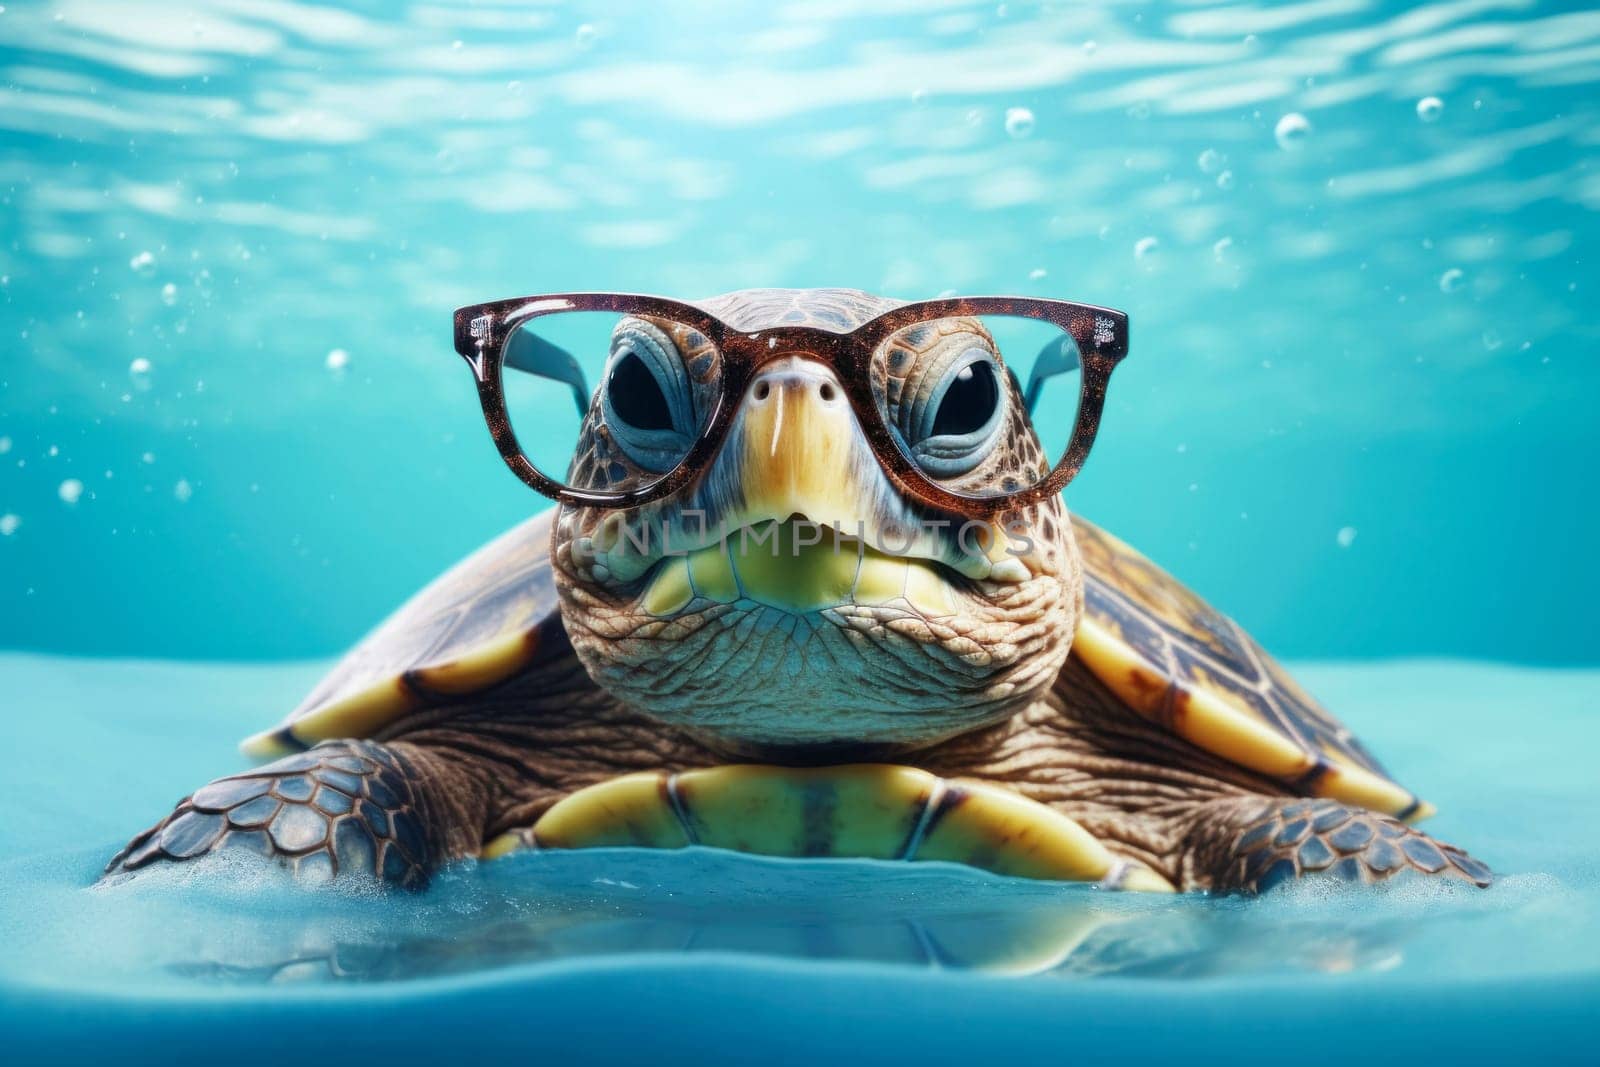 A turtle with a serious expression and glasses against a vibrant blue backdrop by andreyz